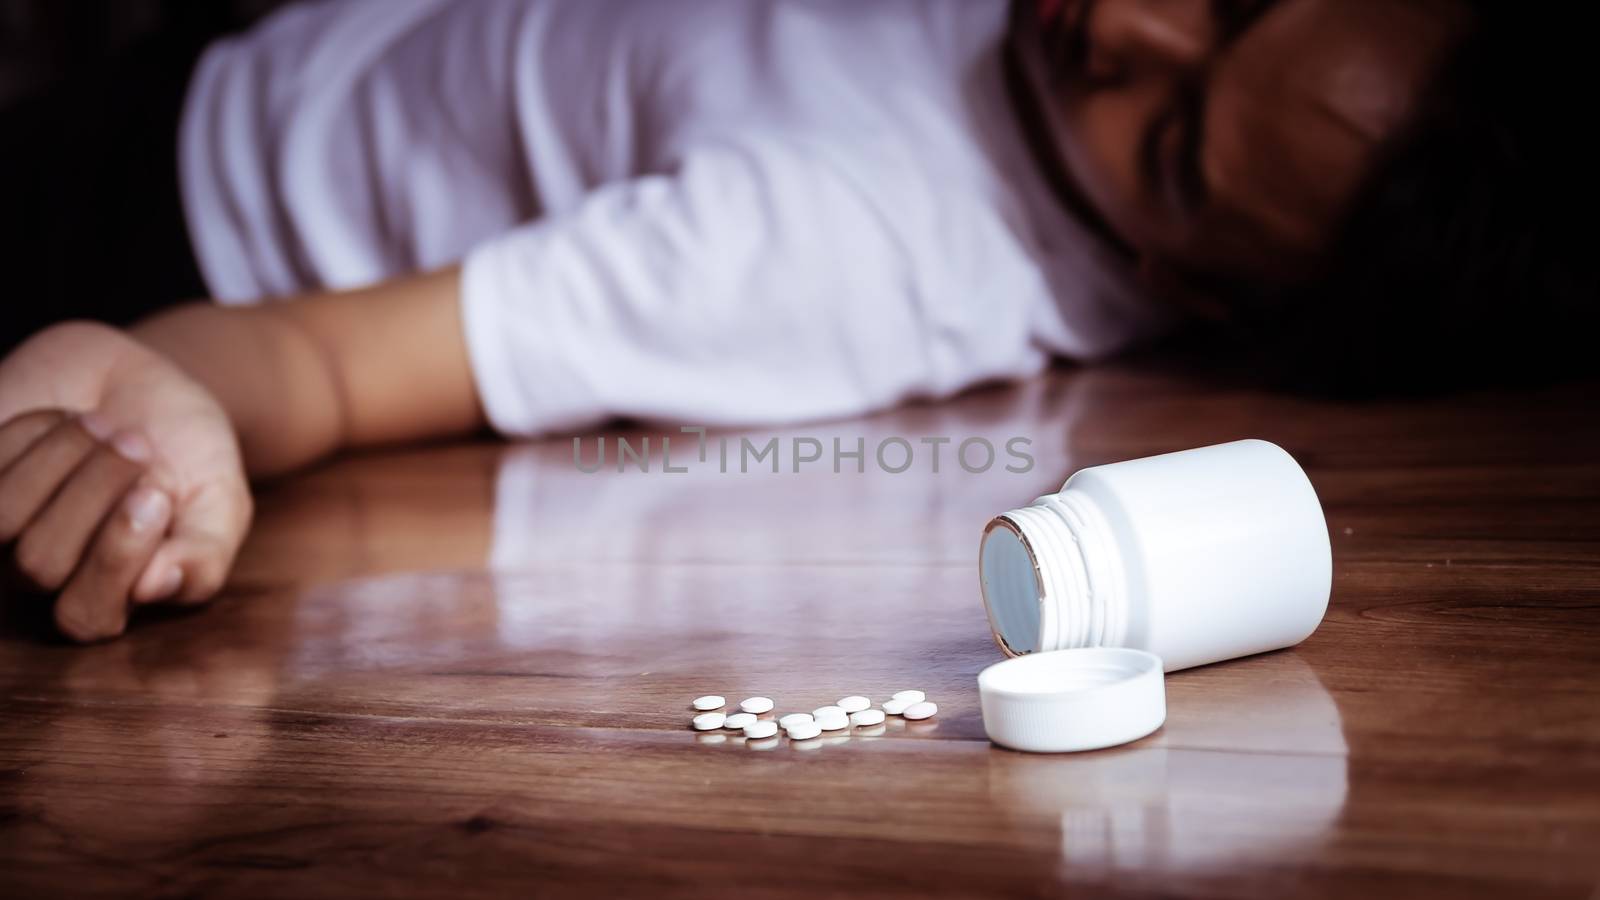 depression man committing suicide by overdosing on medication. close up of overdose pills from plastic medicine container with depress man on the floor